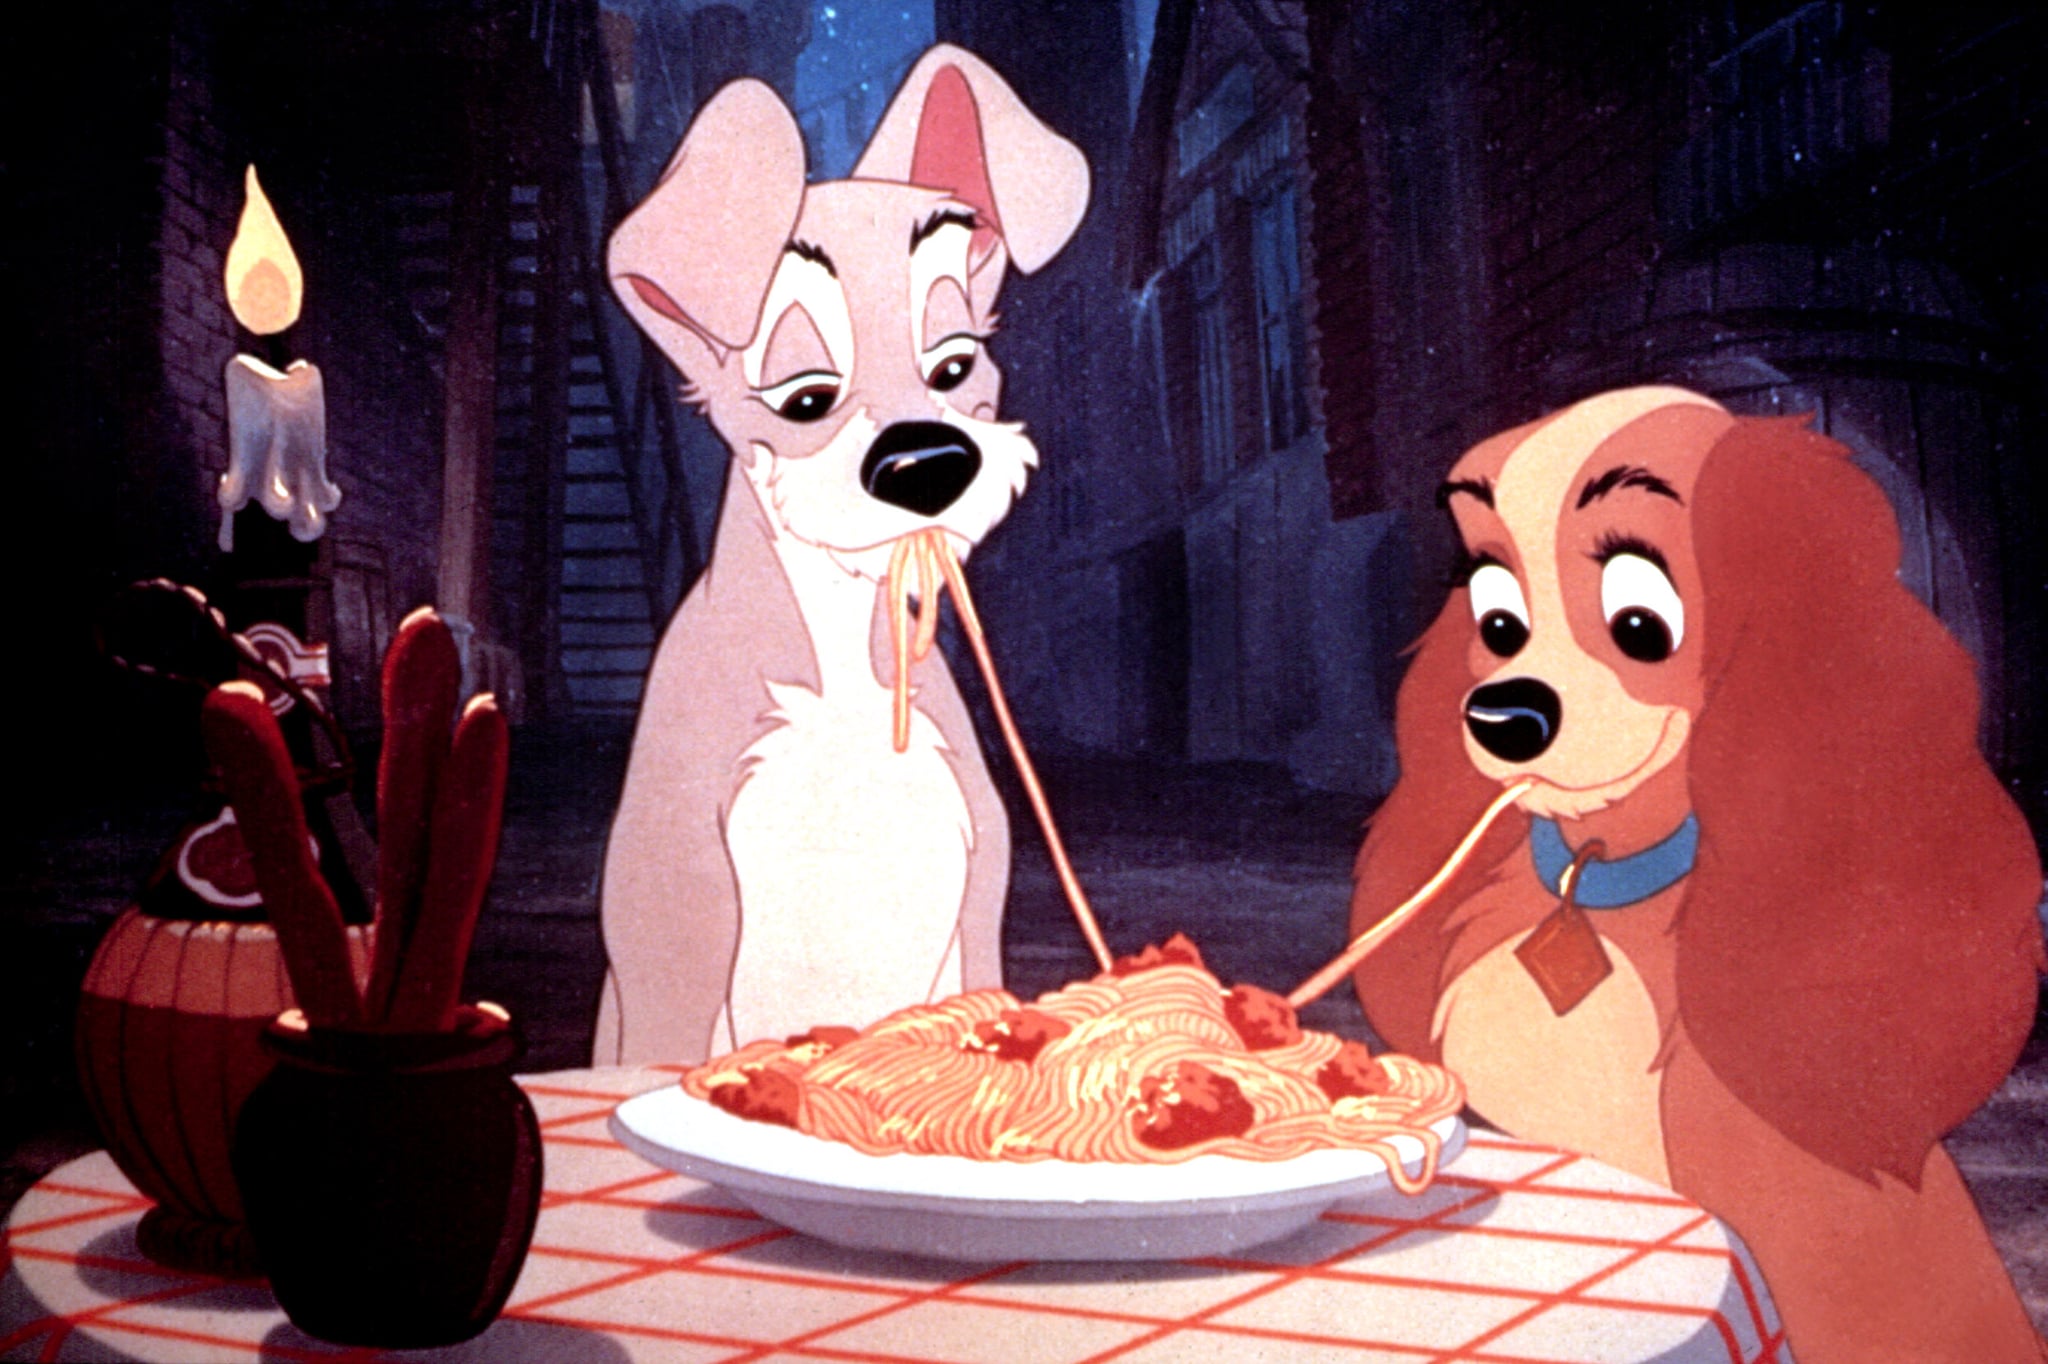 LADY AND THE TRAMP, Tramp, Lady, 1955